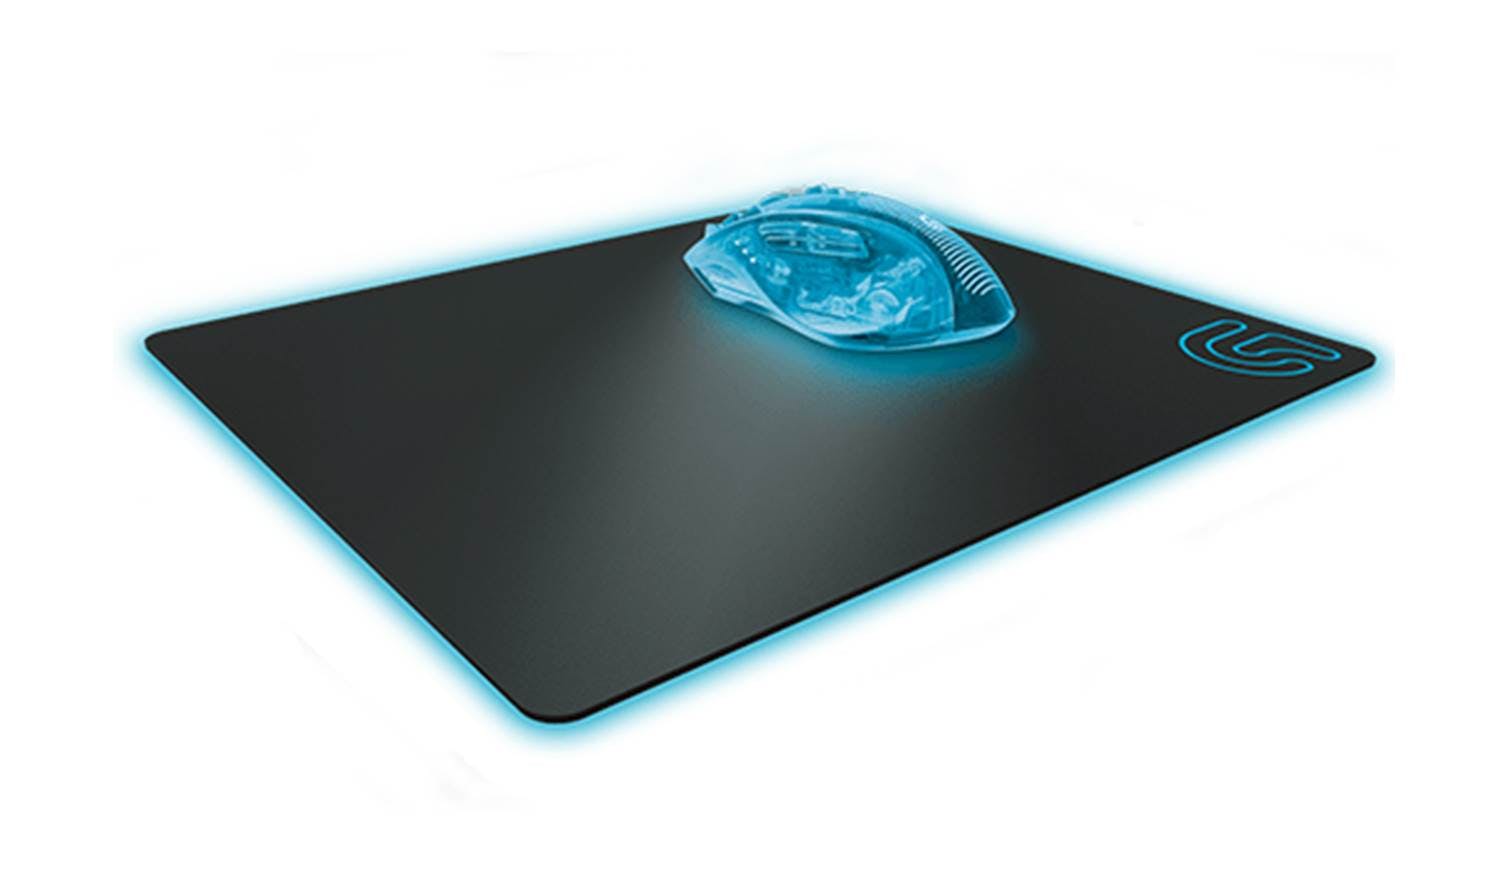 Wording Pigment Occasionally Logitech G440 Hard Gaming Mouse Pad | Harvey Norman Singapore